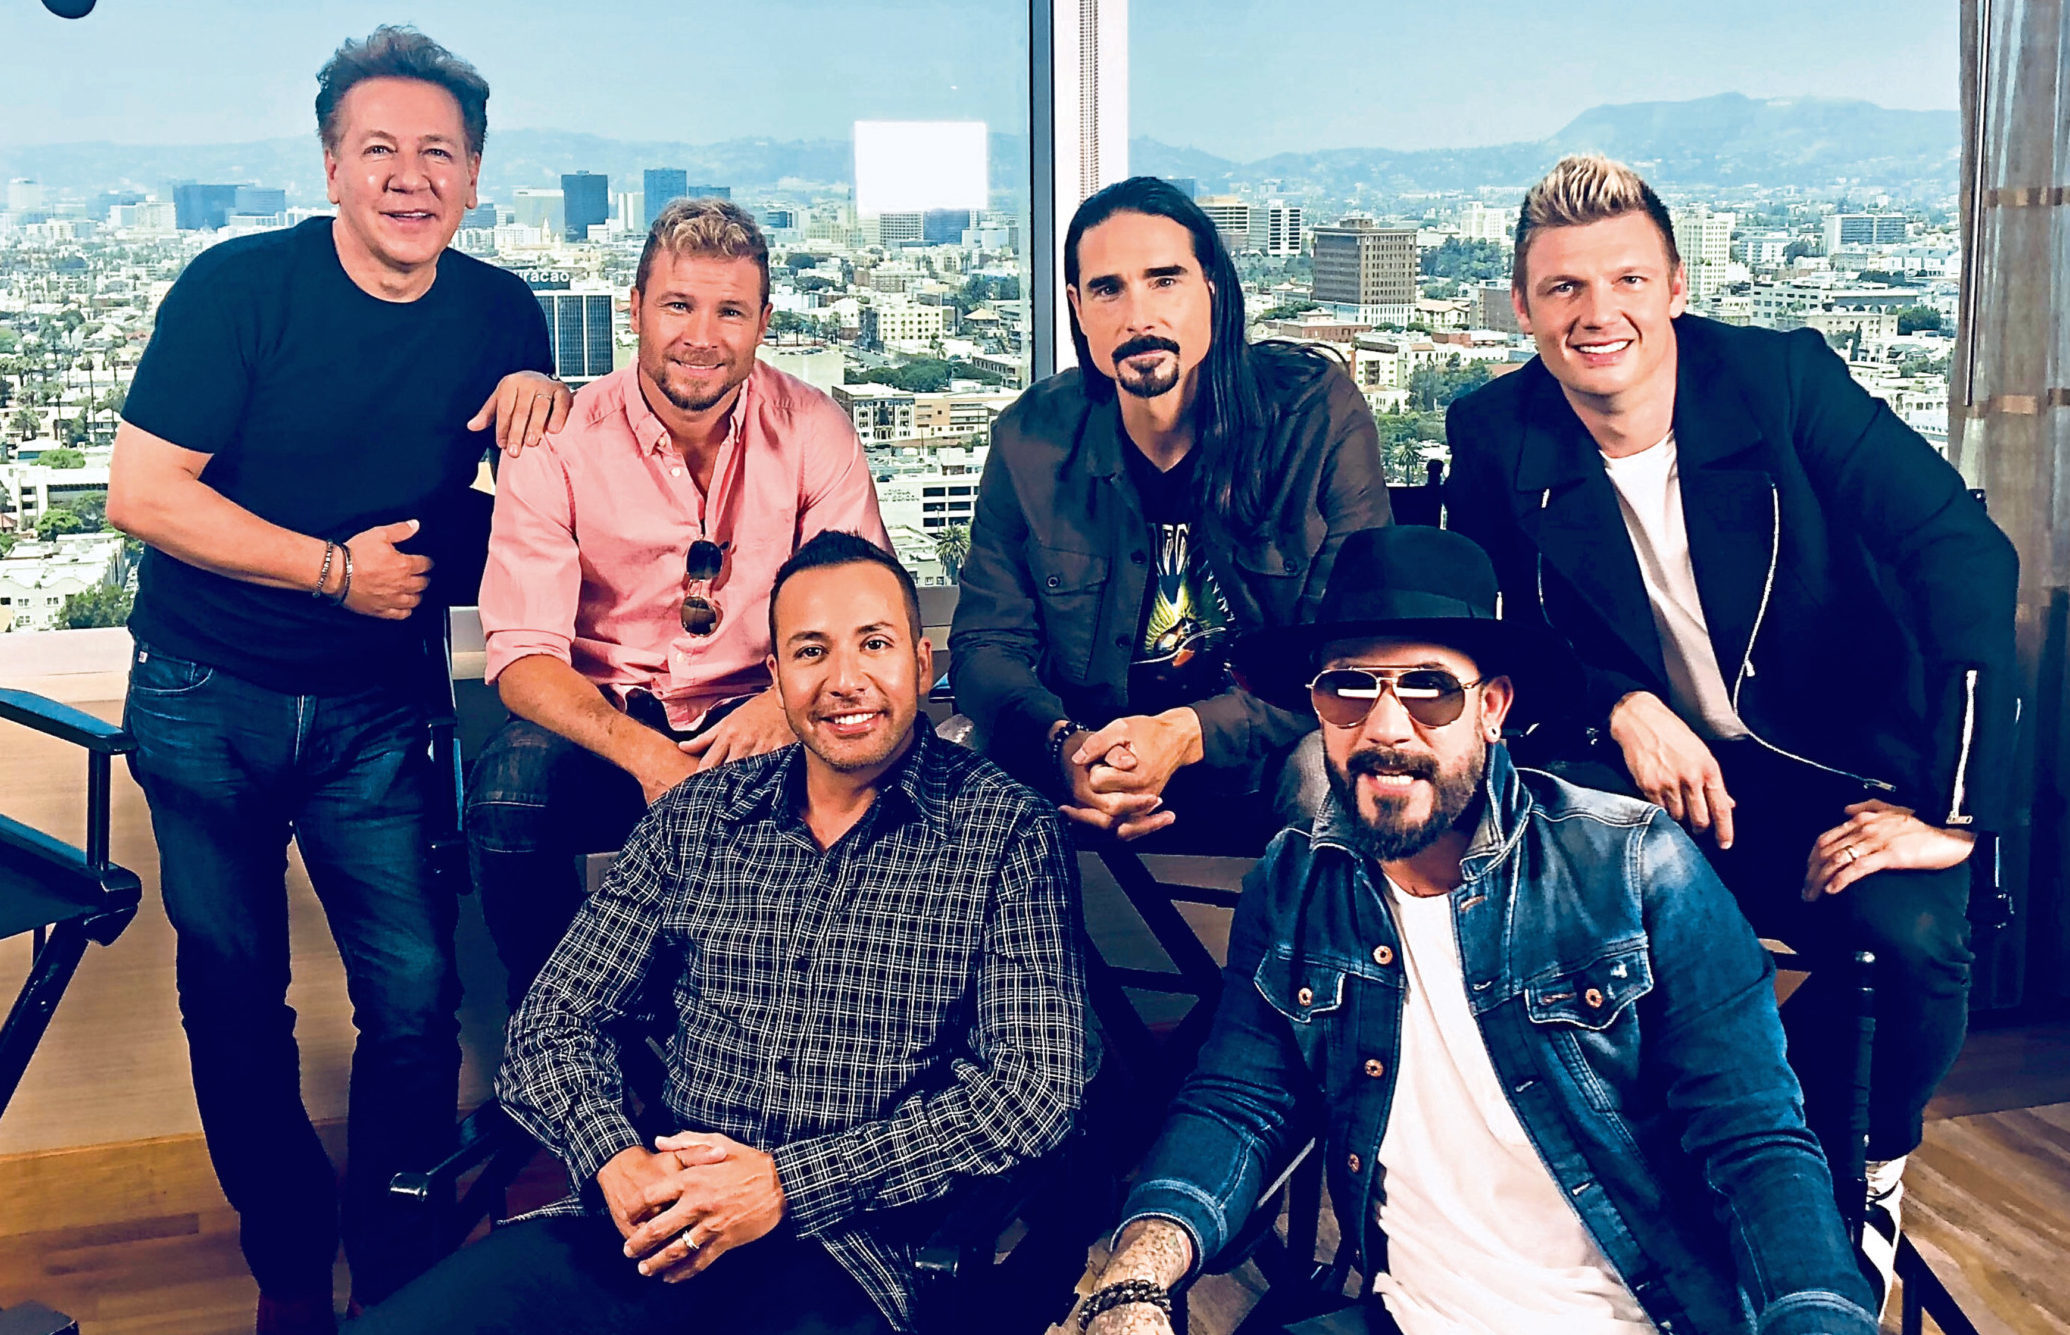 Ross King with the Backstreet Boys